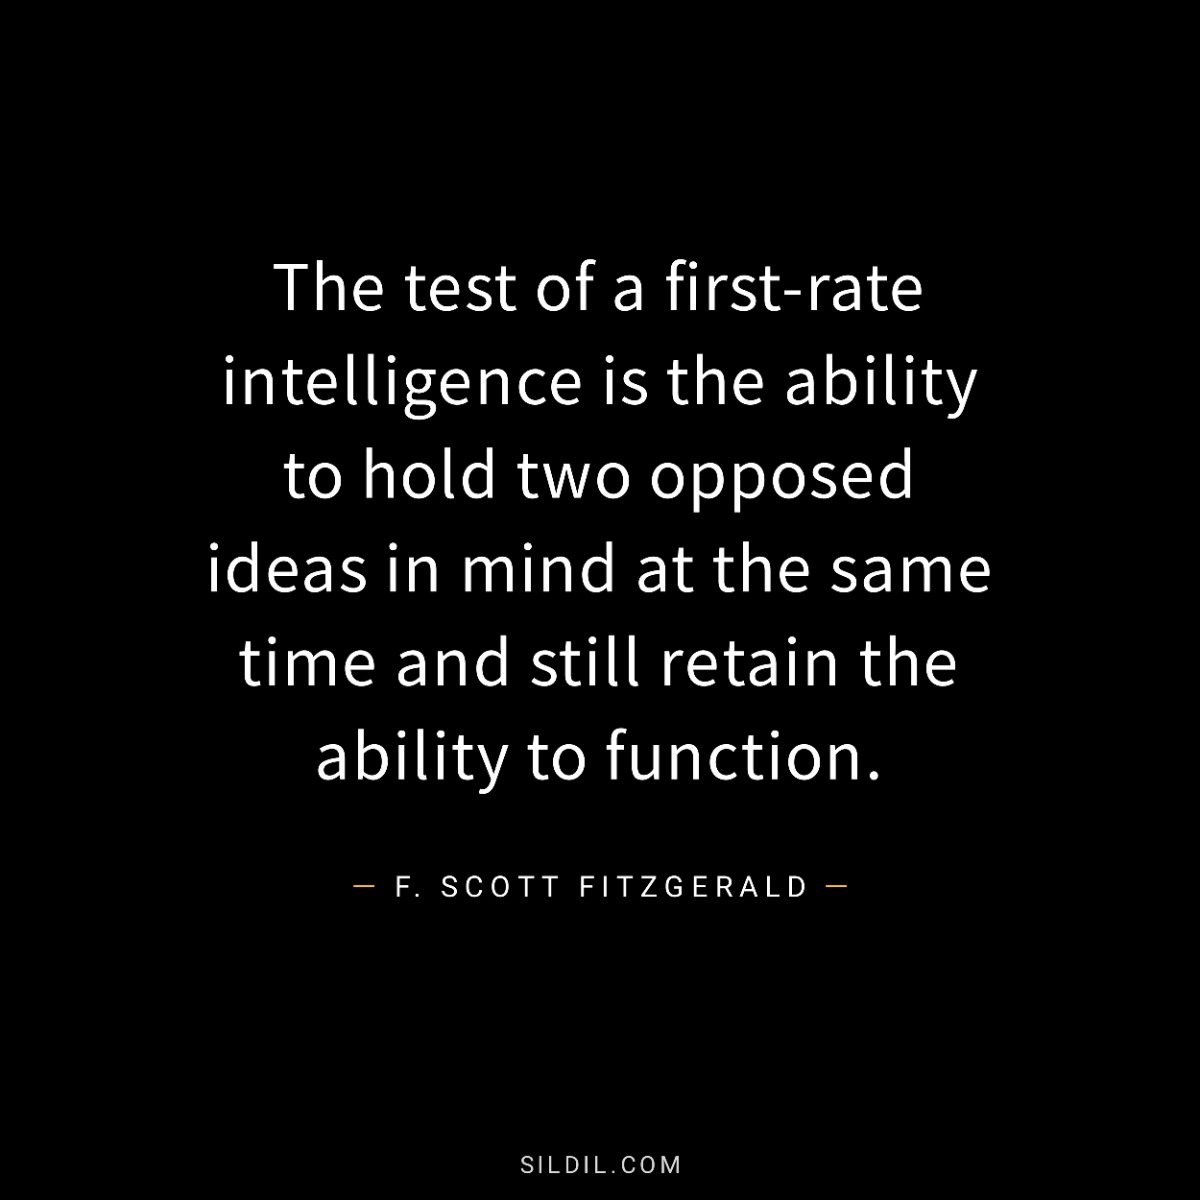 The test of a first-rate intelligence is the ability to hold two opposed ideas in mind at the same time and still retain the ability to function.